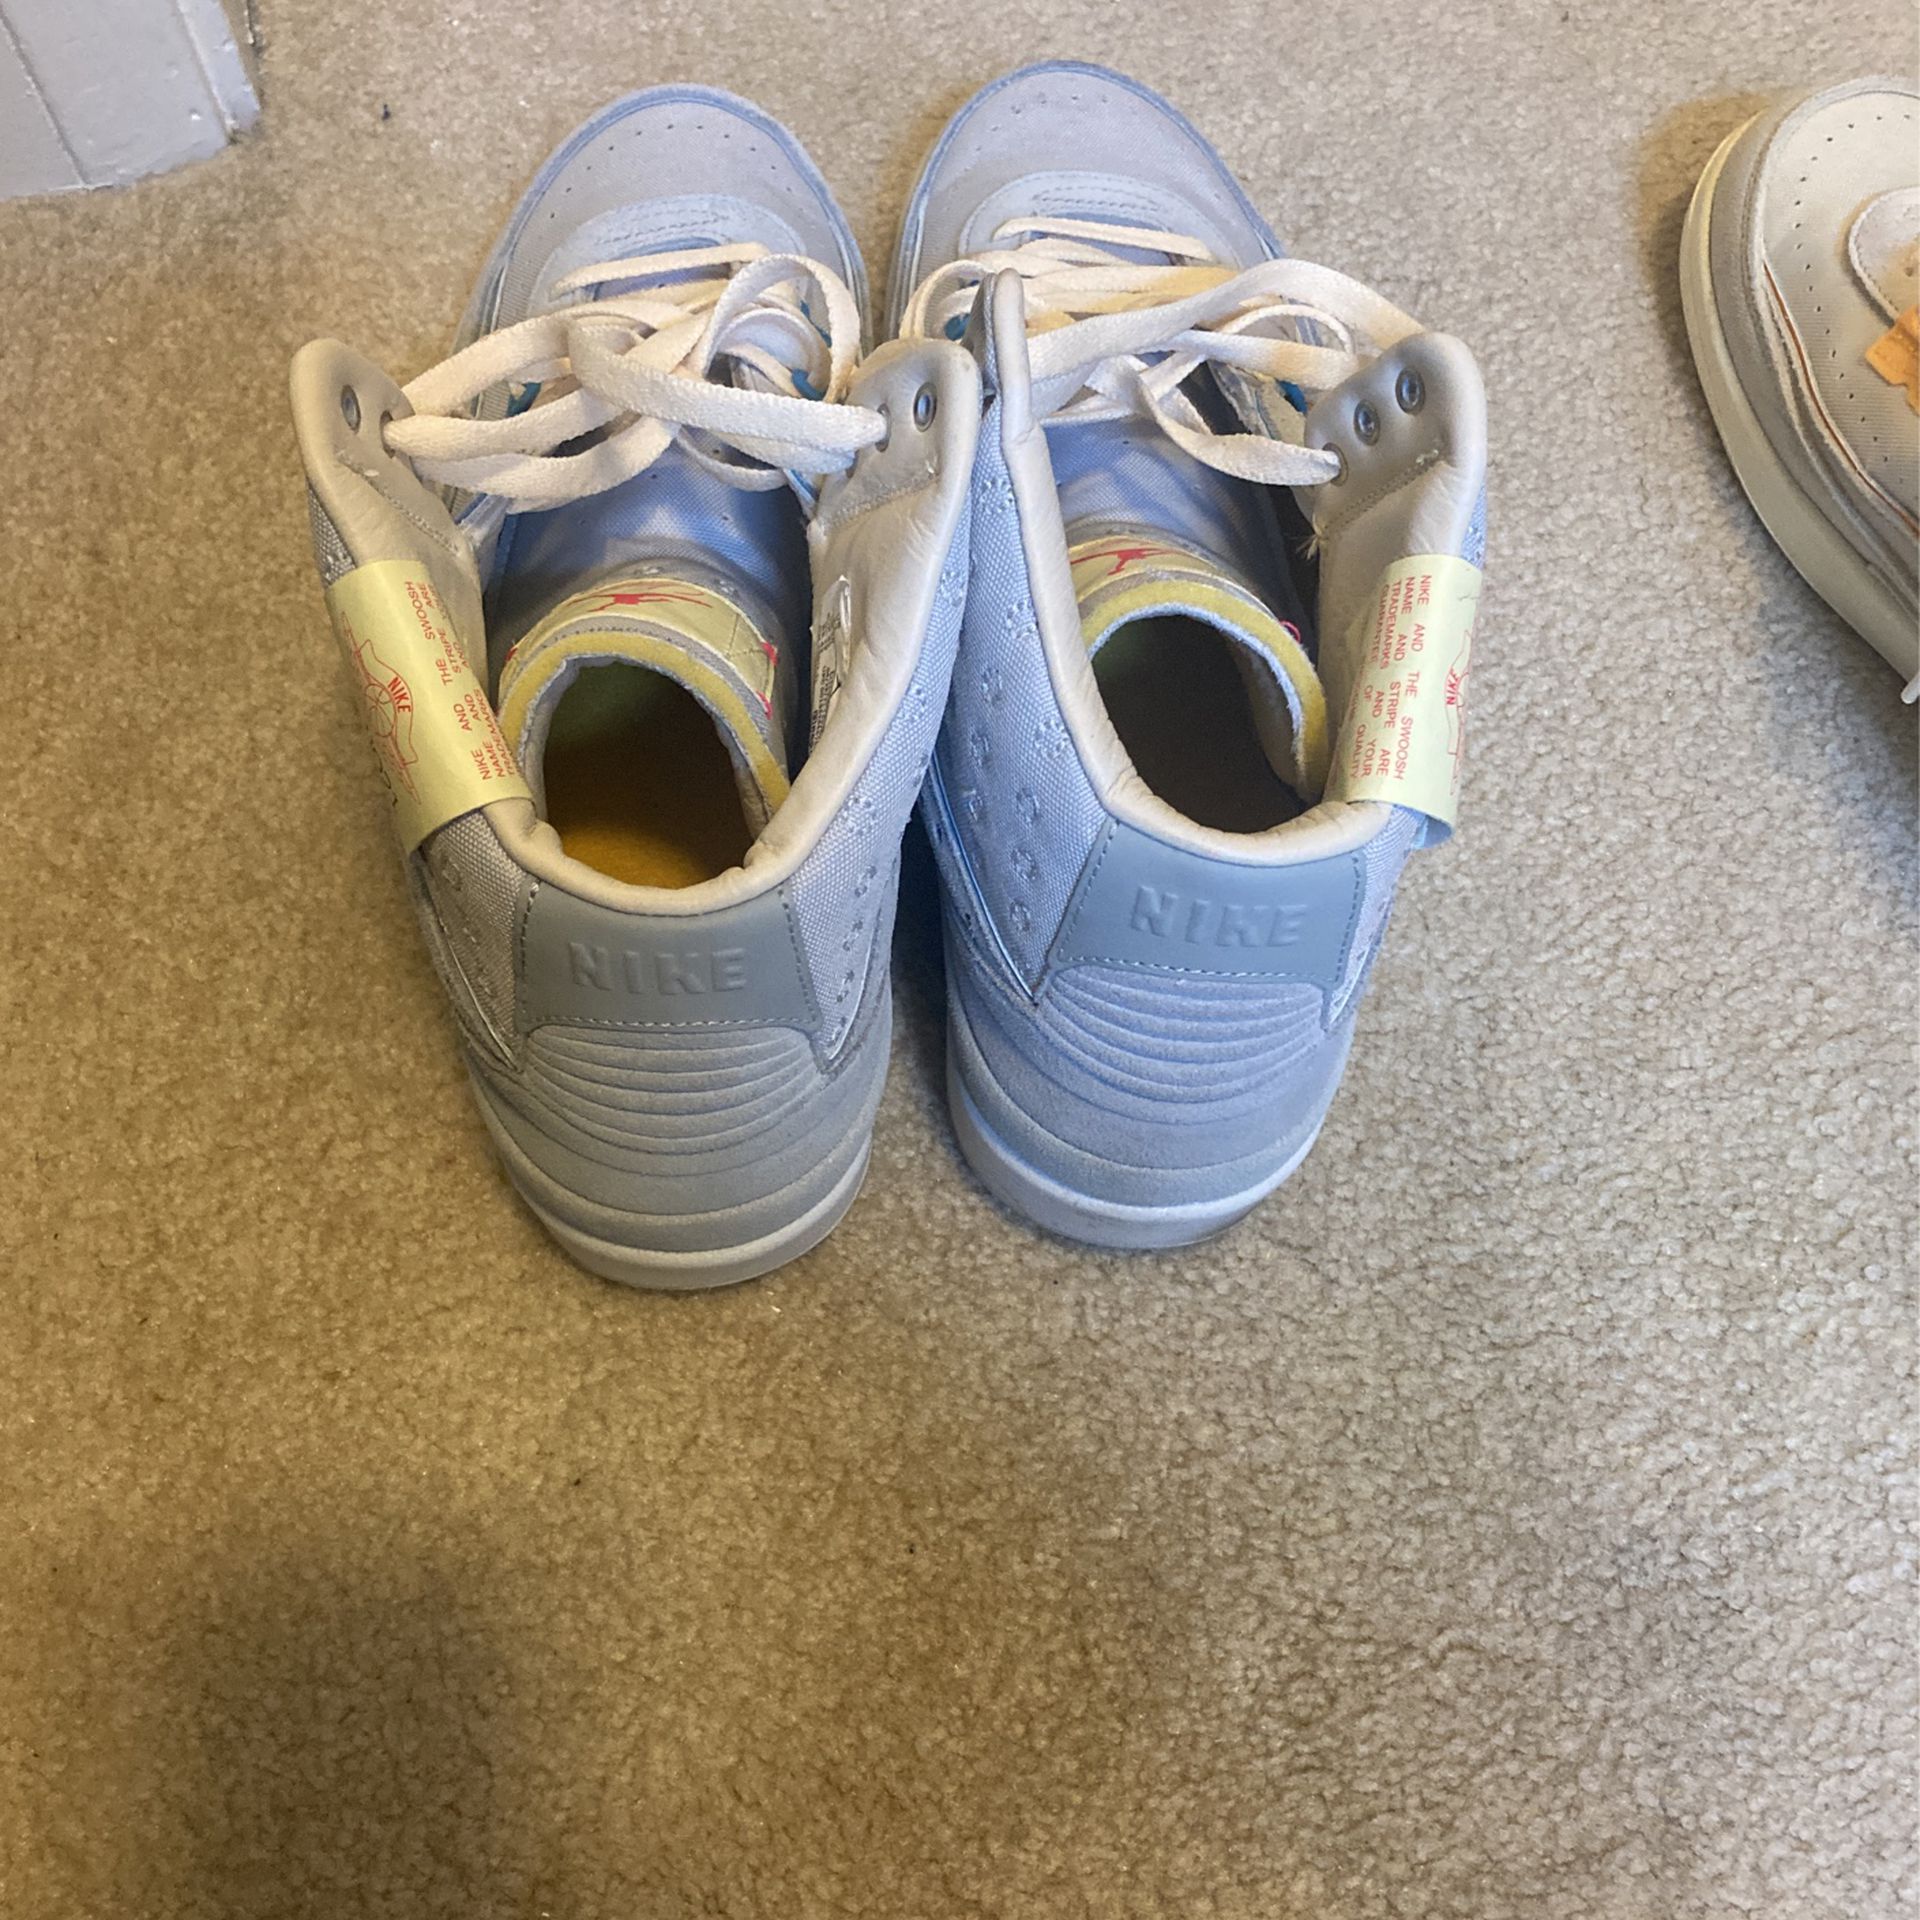 Union 2s Size 11 for Sale in San Francisco, CA - OfferUp